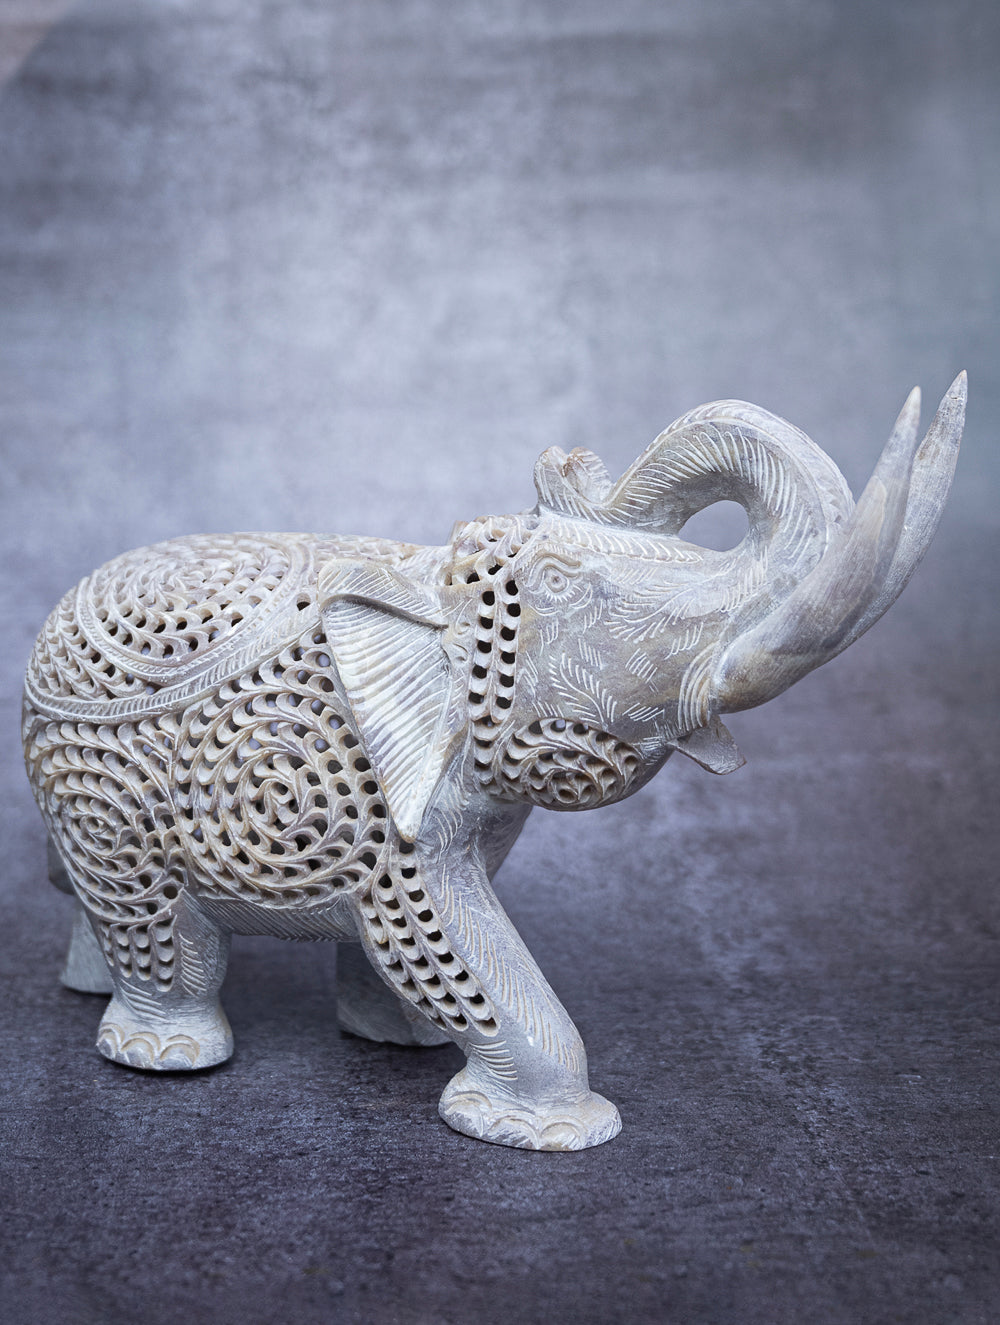 Load image into Gallery viewer, Soapstone Filigree Elephant Curio